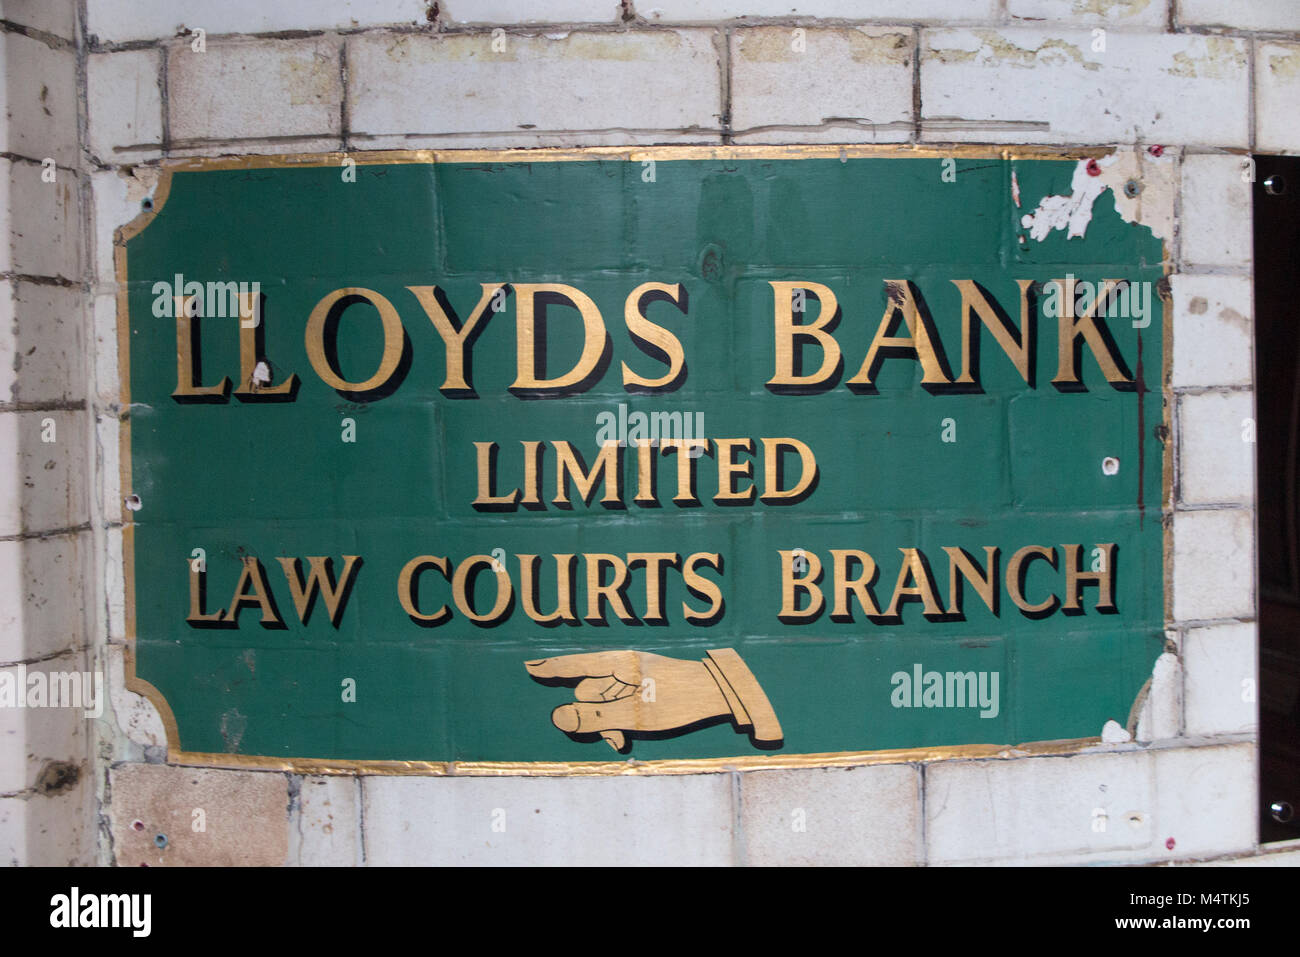 An old metal sign showing directions to Lloyds Bank Limited Law Courts Branch Stock Photo